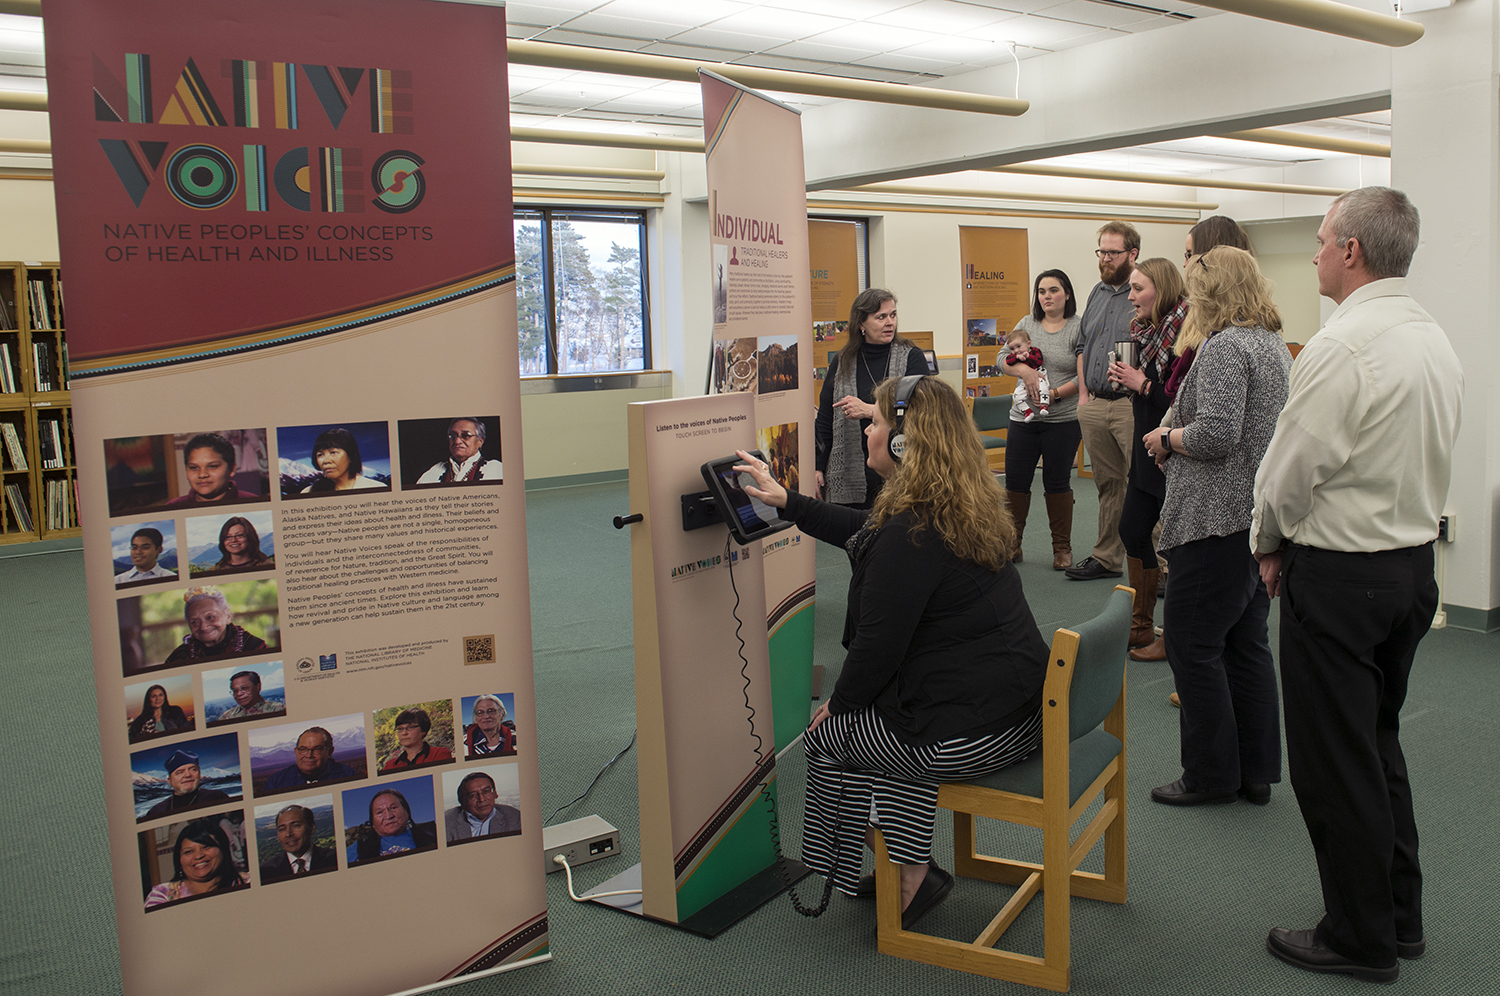 Bemidji State University faculty and staff viewing the Native Voices concept banners and using the installed iPads that feature video testimonials.